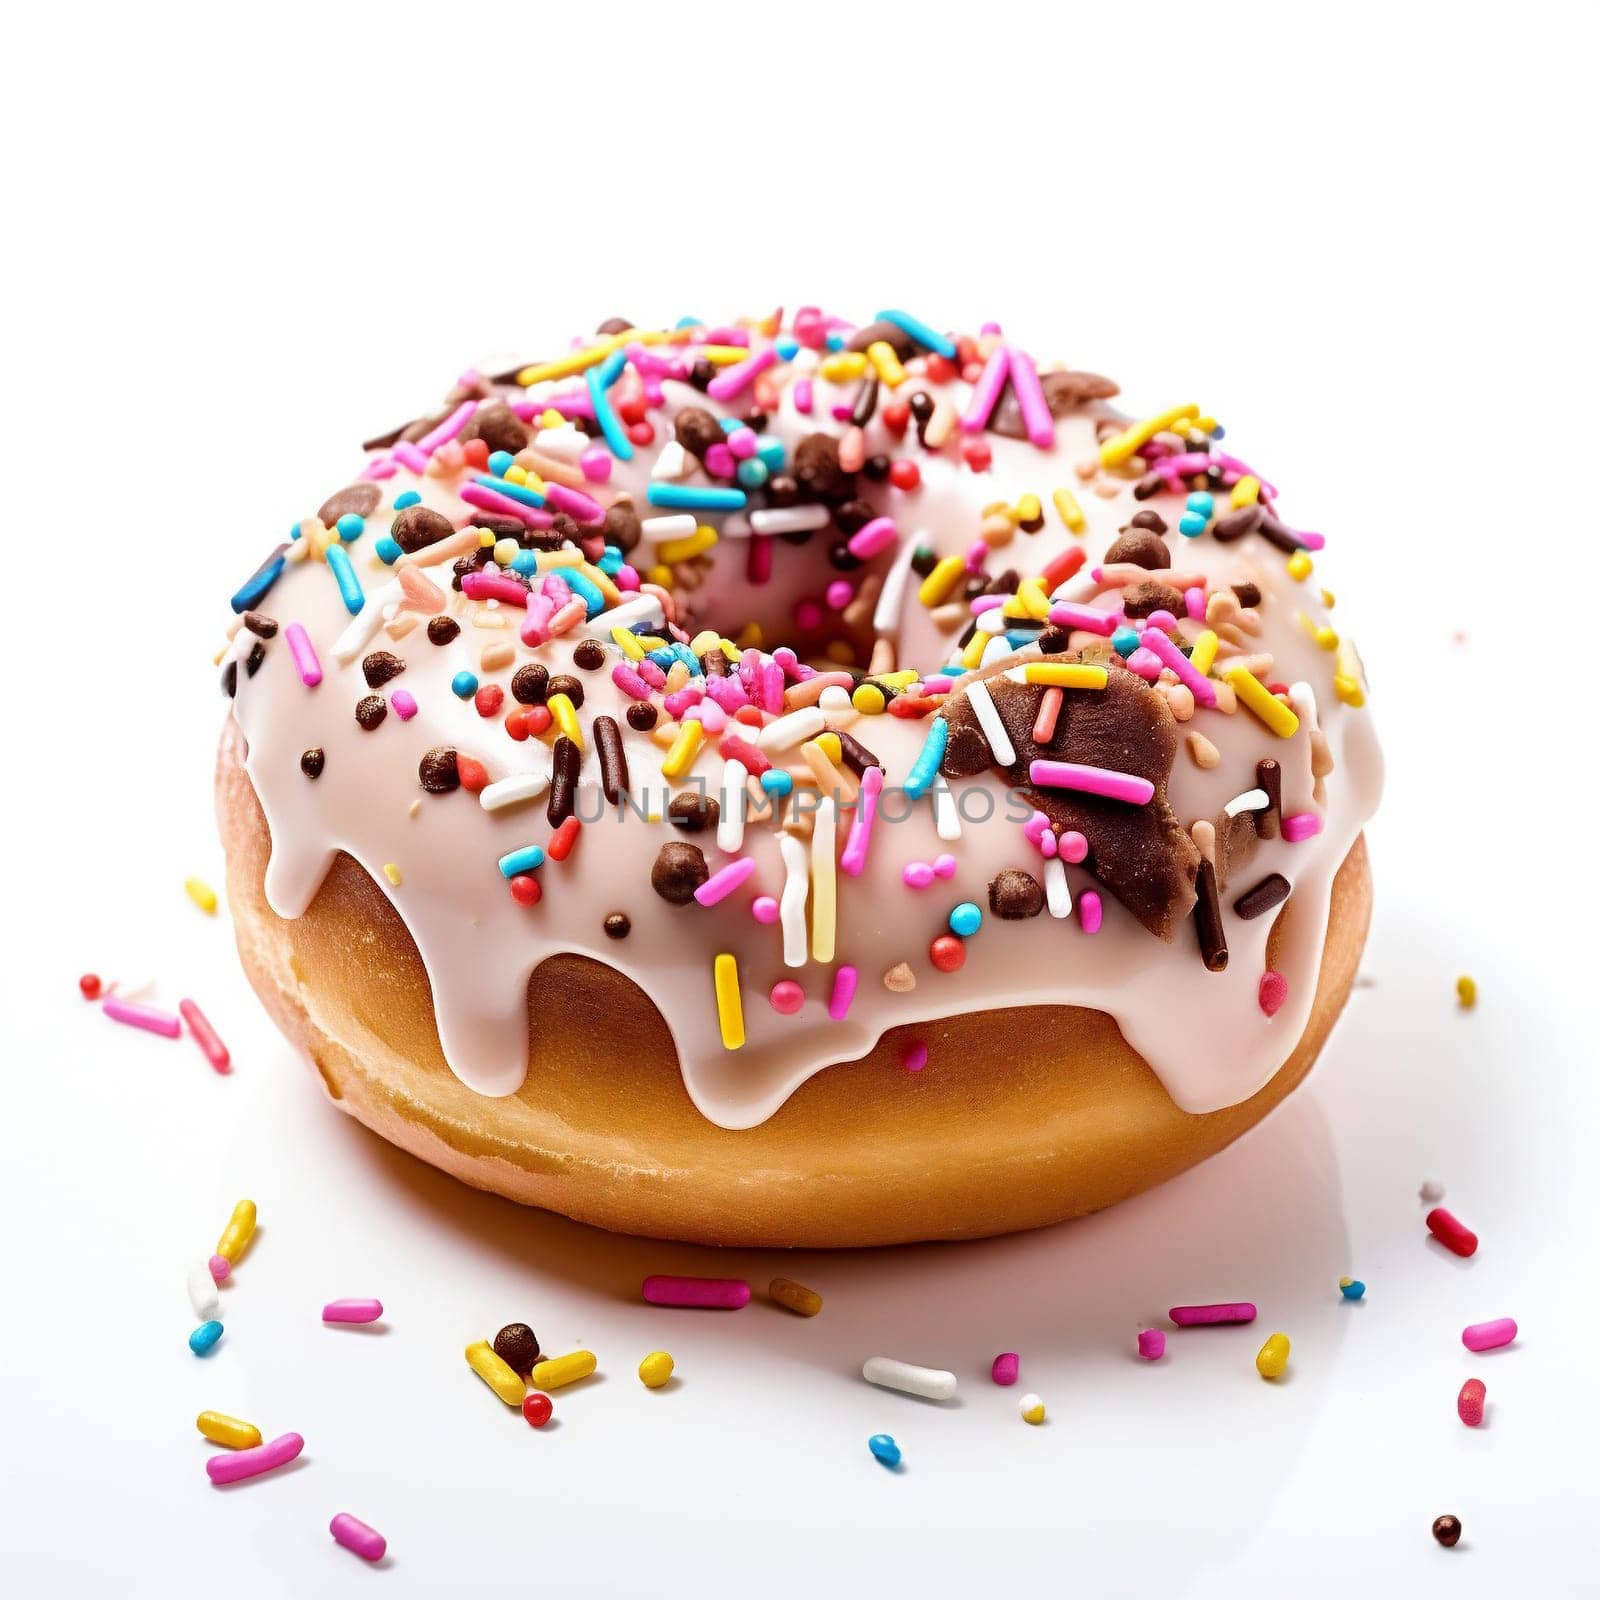 Sweet Vanilla Donut on White Background. White Donut Decorated with Colorful Sprinkles Isolated on White Background.